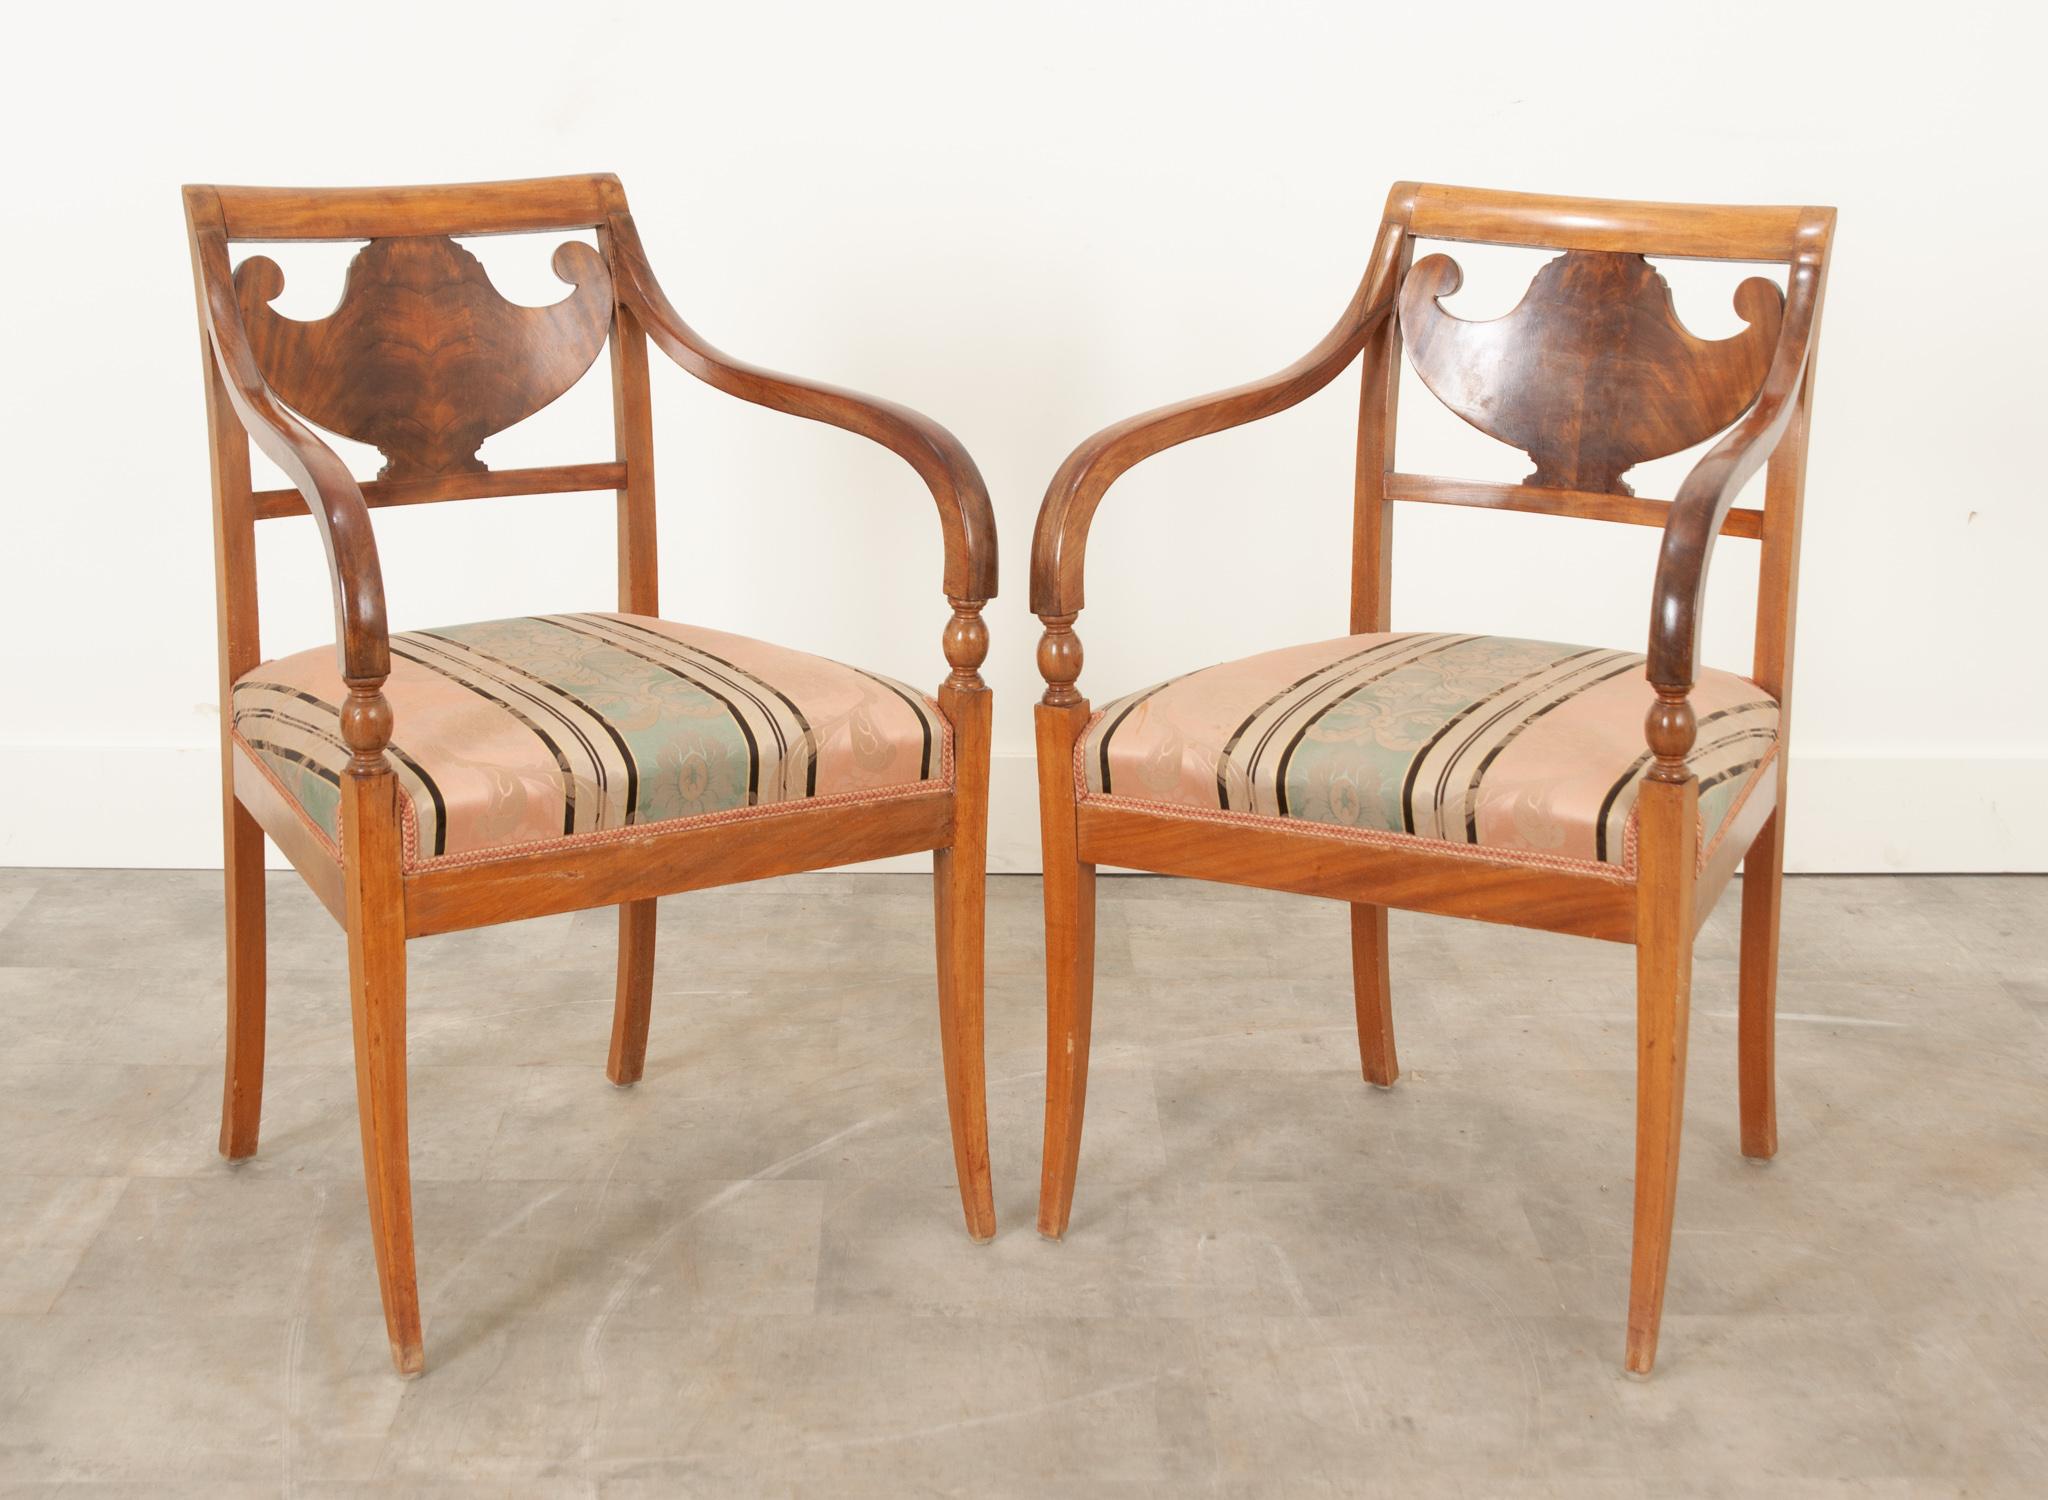 Pair of 19th Century Dutch Arm Chairs In Good Condition For Sale In Baton Rouge, LA